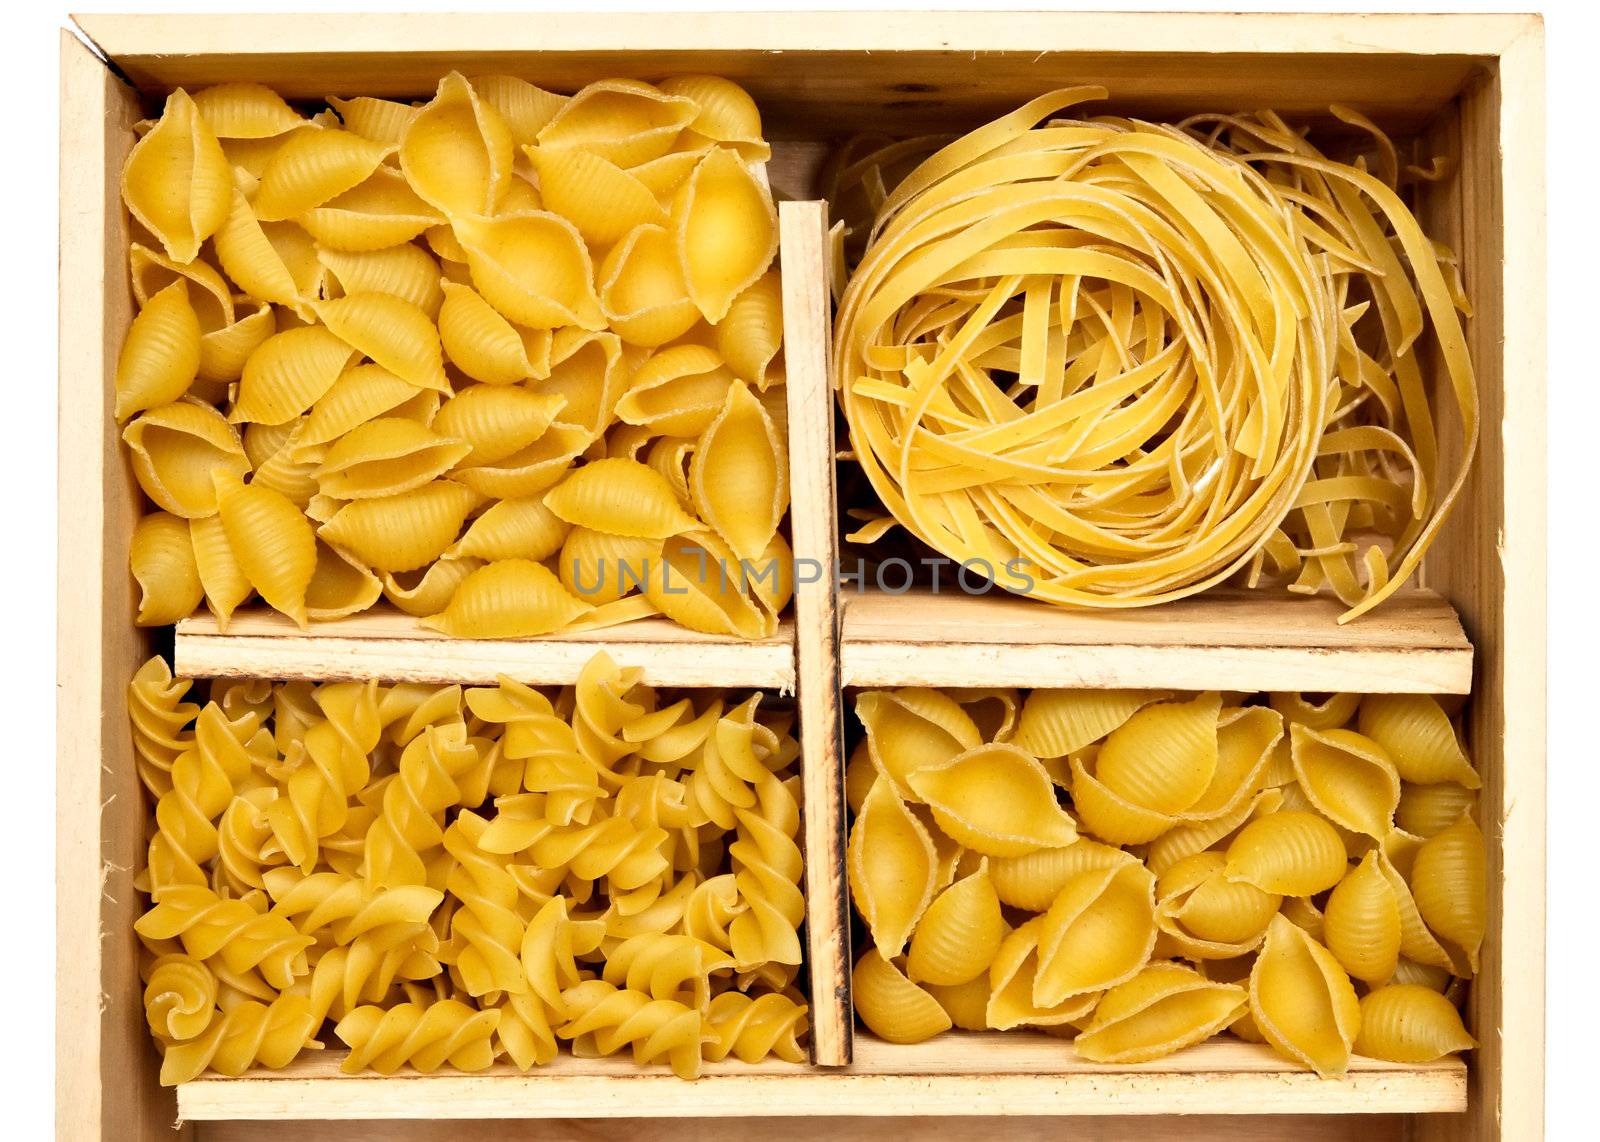 Set of four varieties of pasta by kirs-ua